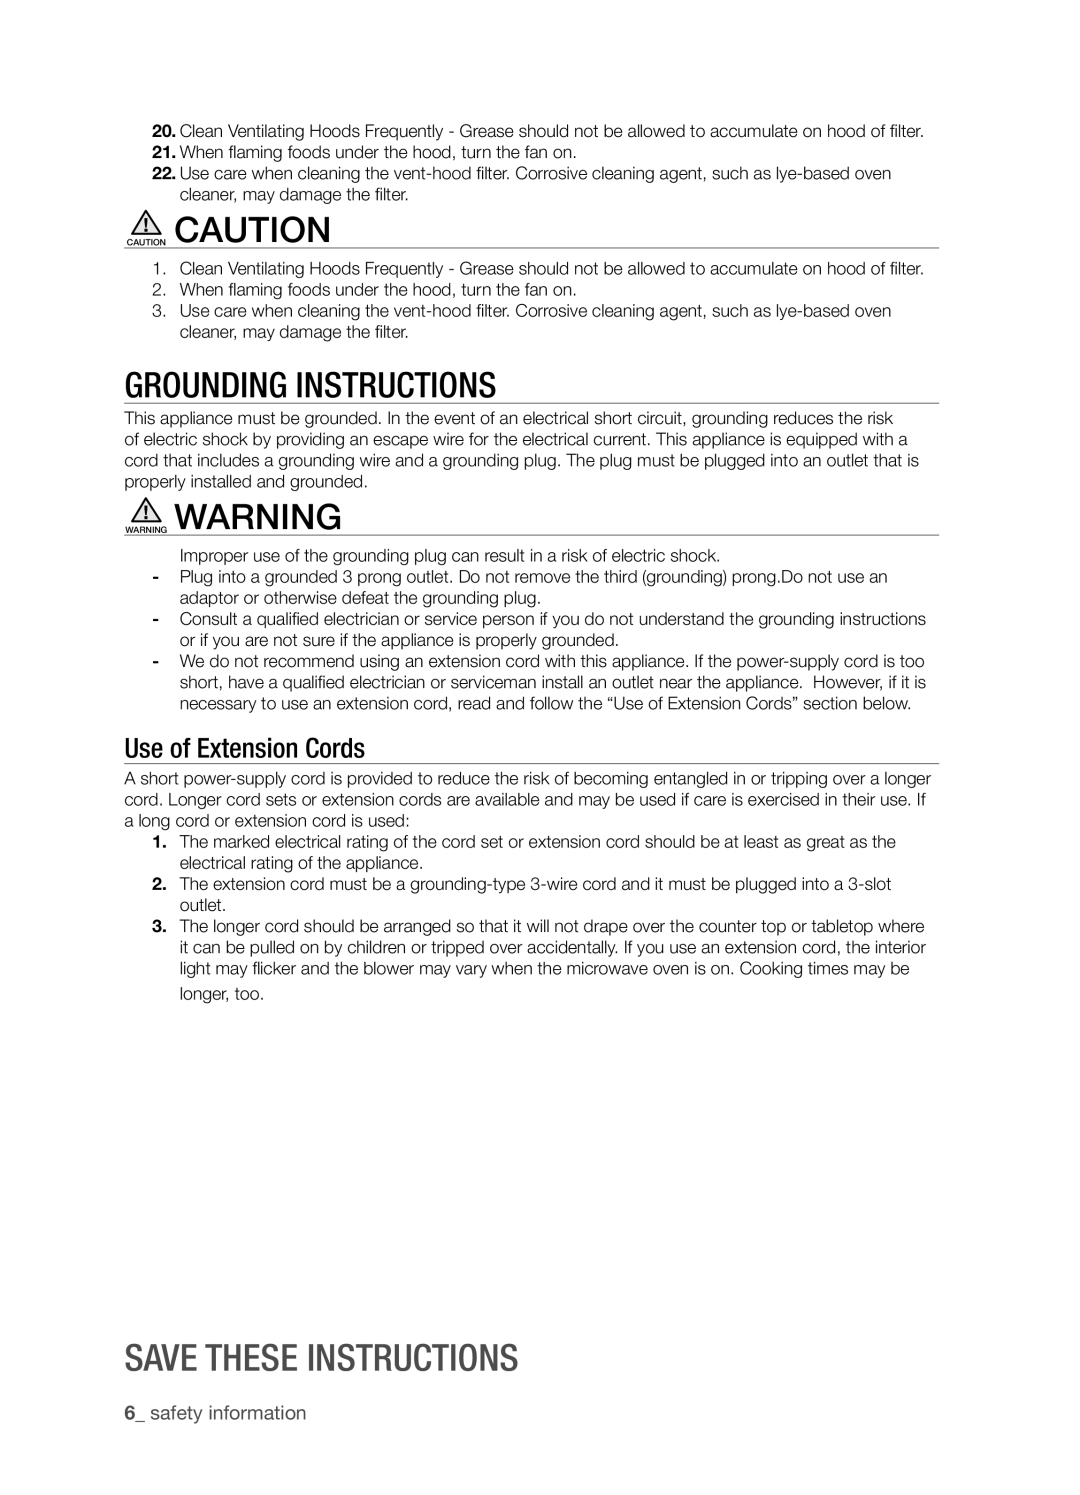 Samsung SMH9151B user manual Grounding Instructions, Save these instructions, Use of Extension Cords, safety information 